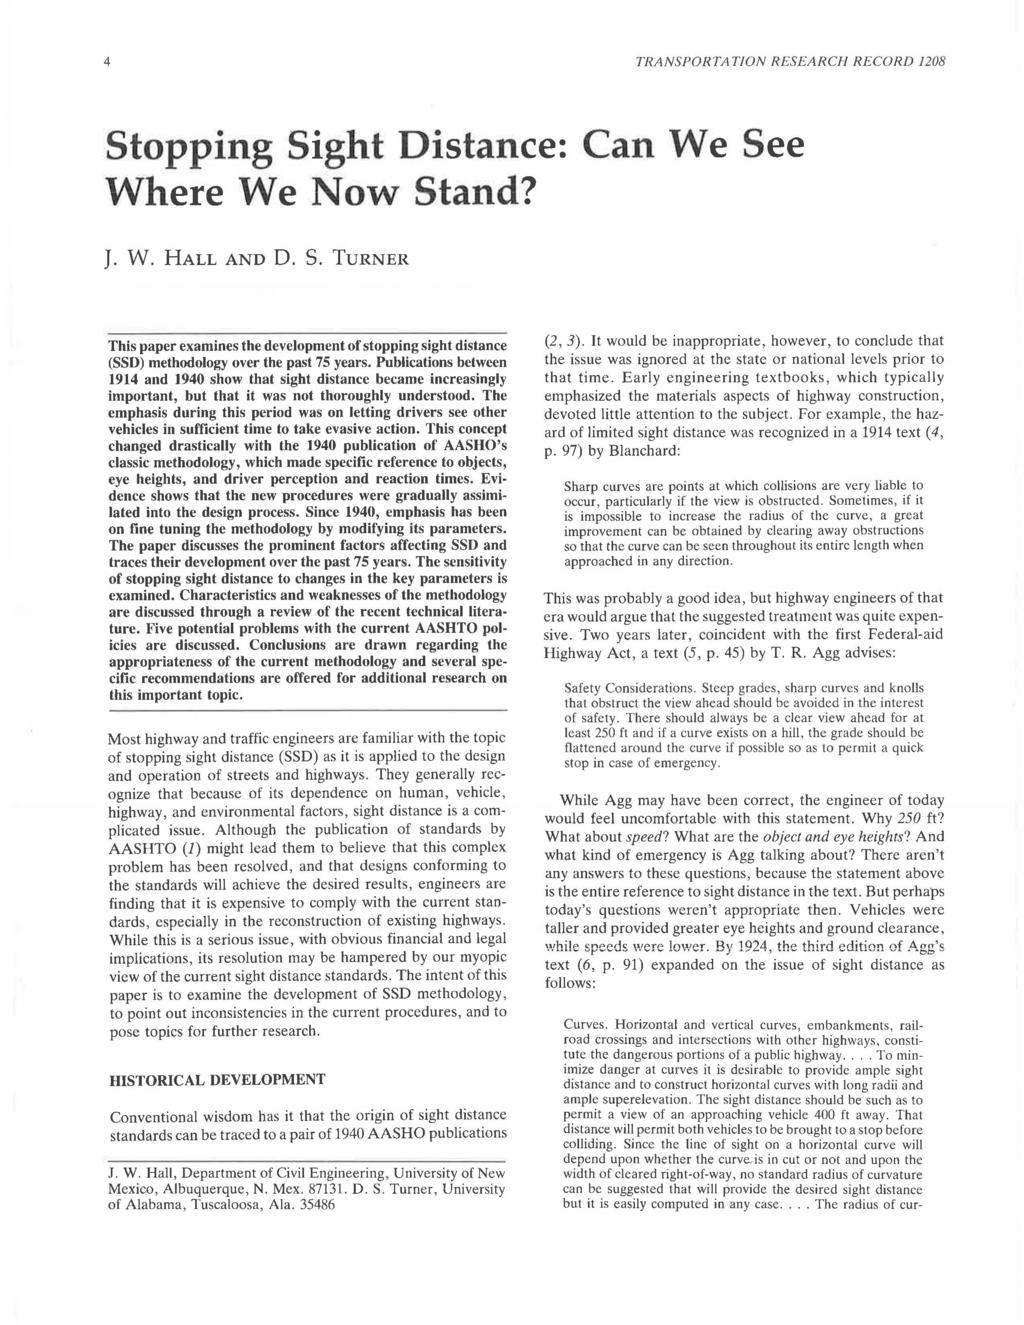 4 TRANSPORTATION RESEARCH RECORD 1208 Stopping Sight Distance: Can We See Where We Now Stand? J. W. HALL AND D. s.